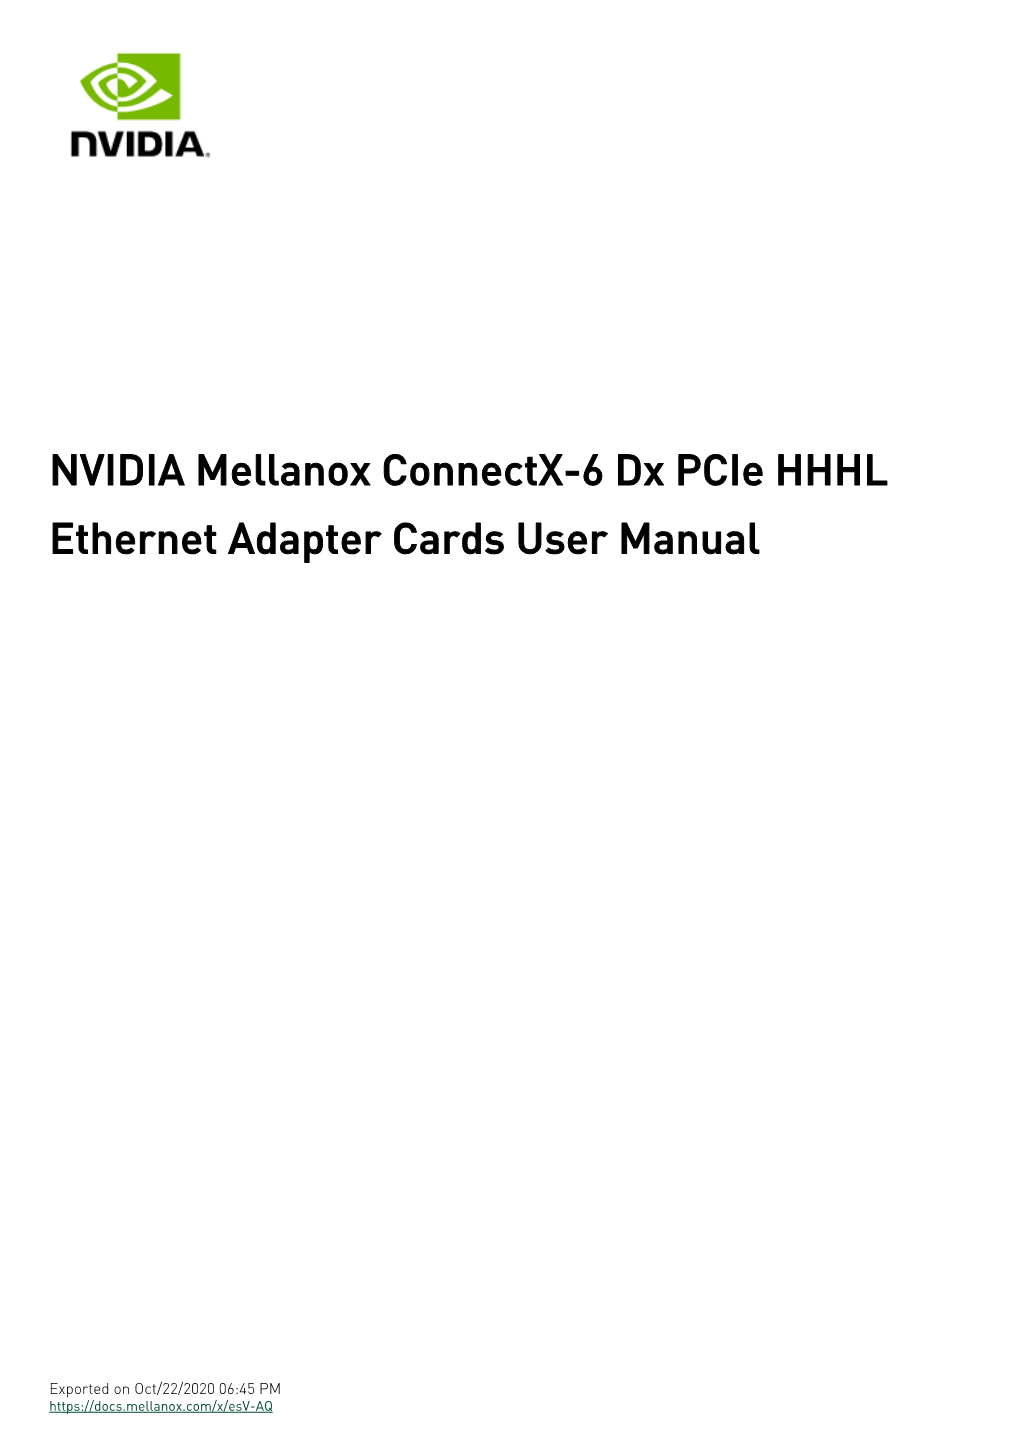 NVIDIA Mellanox Connectx-6 Dx Pcie HHHL Ethernet Adapter Cards User Manual